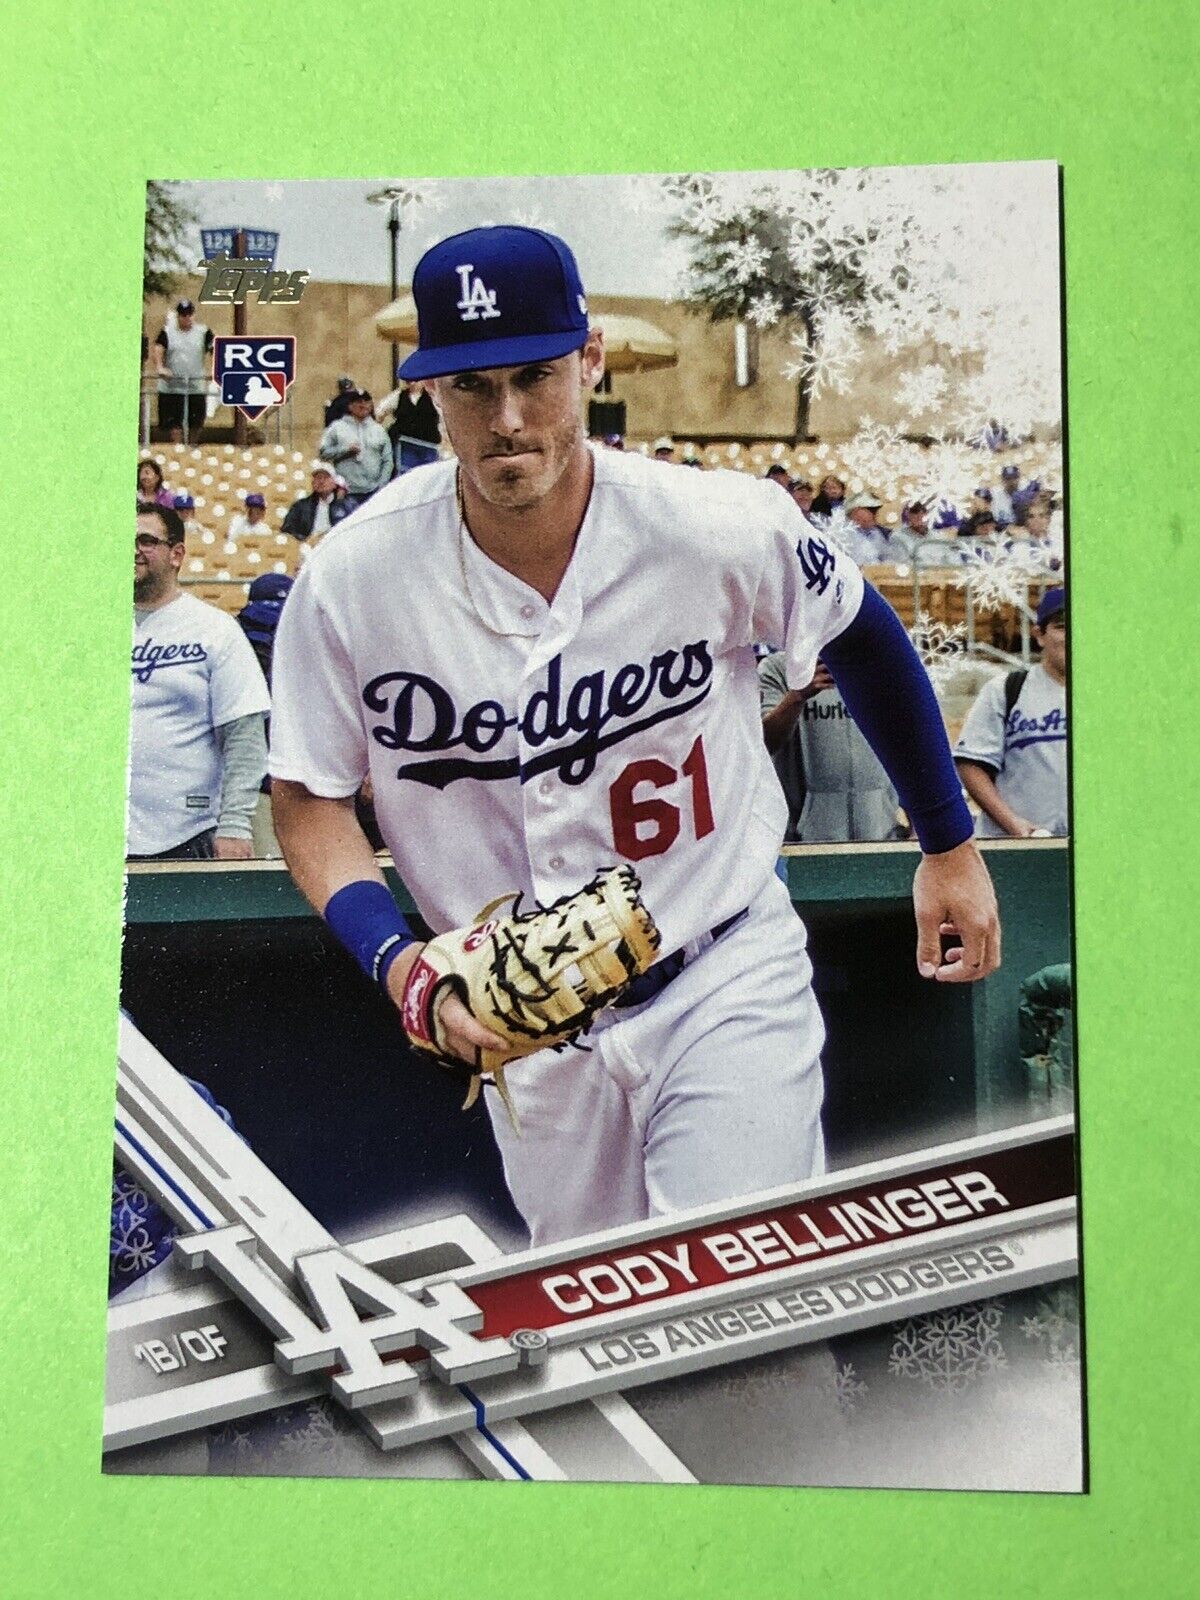 CODY BELLINGER 2017 Topps Holiday RC Snowflake Card #HMW120 Los Angeles Dodgers